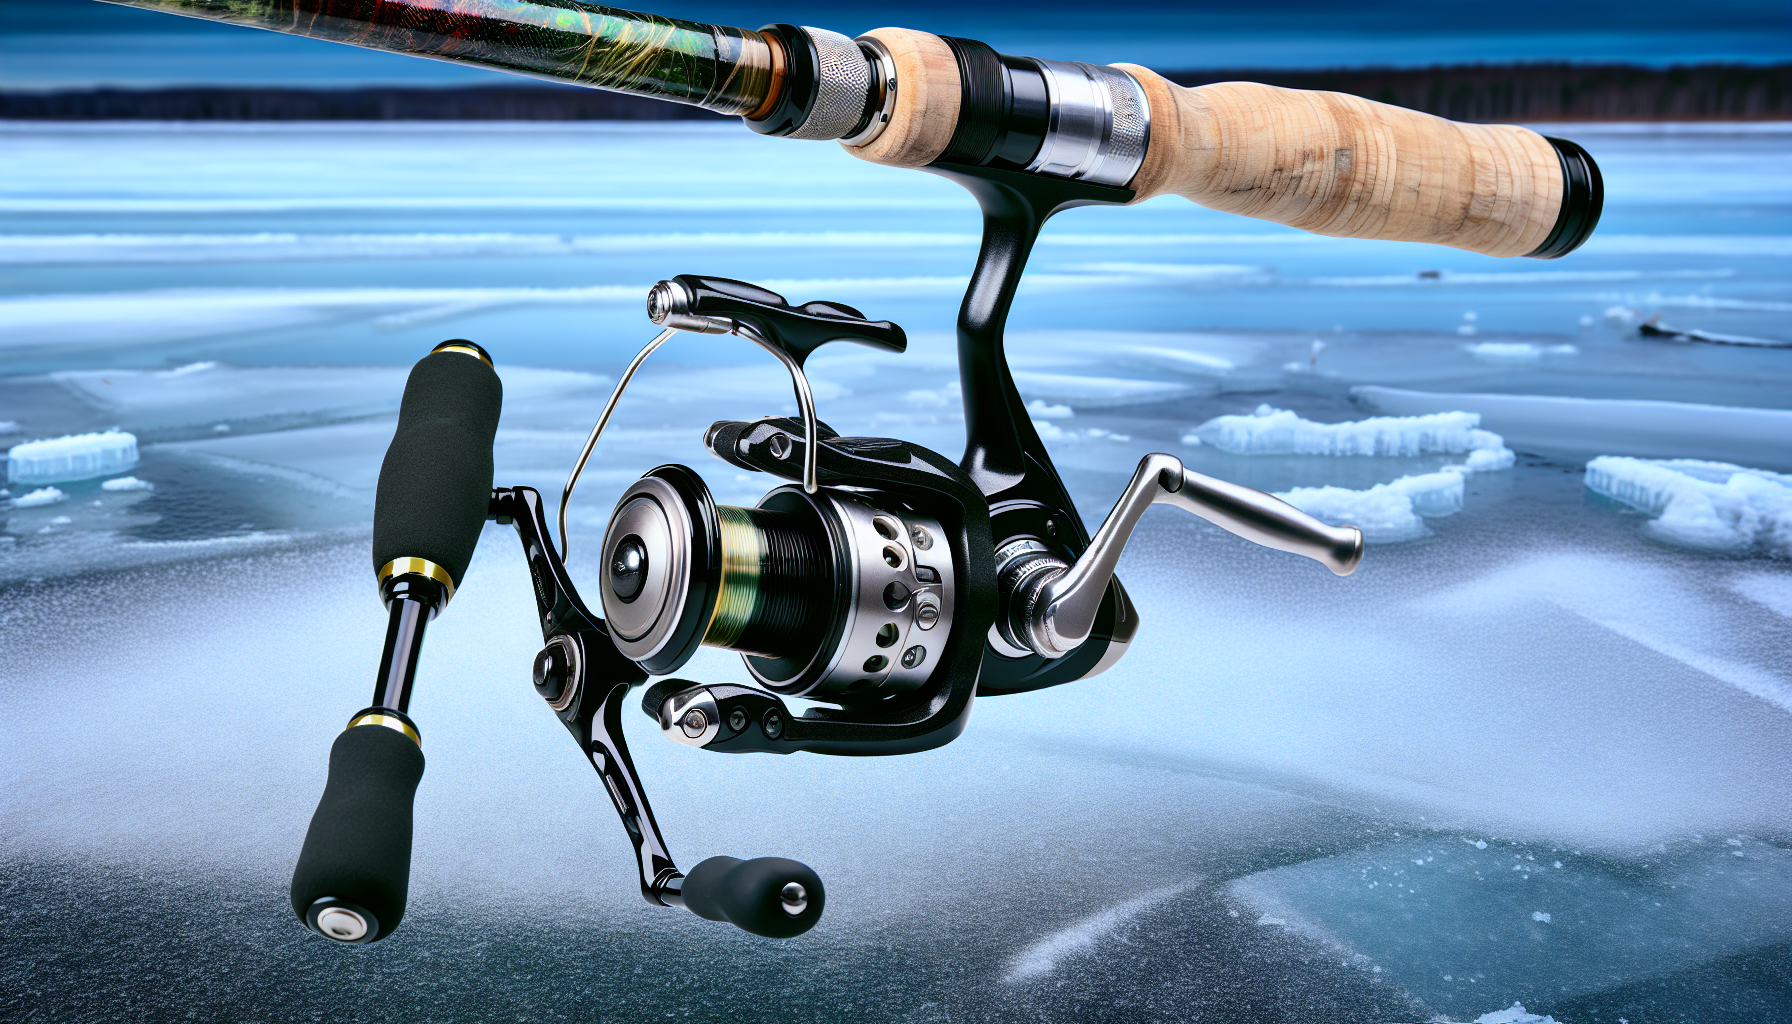 Fishing rod and reel combo for winter bass fishing